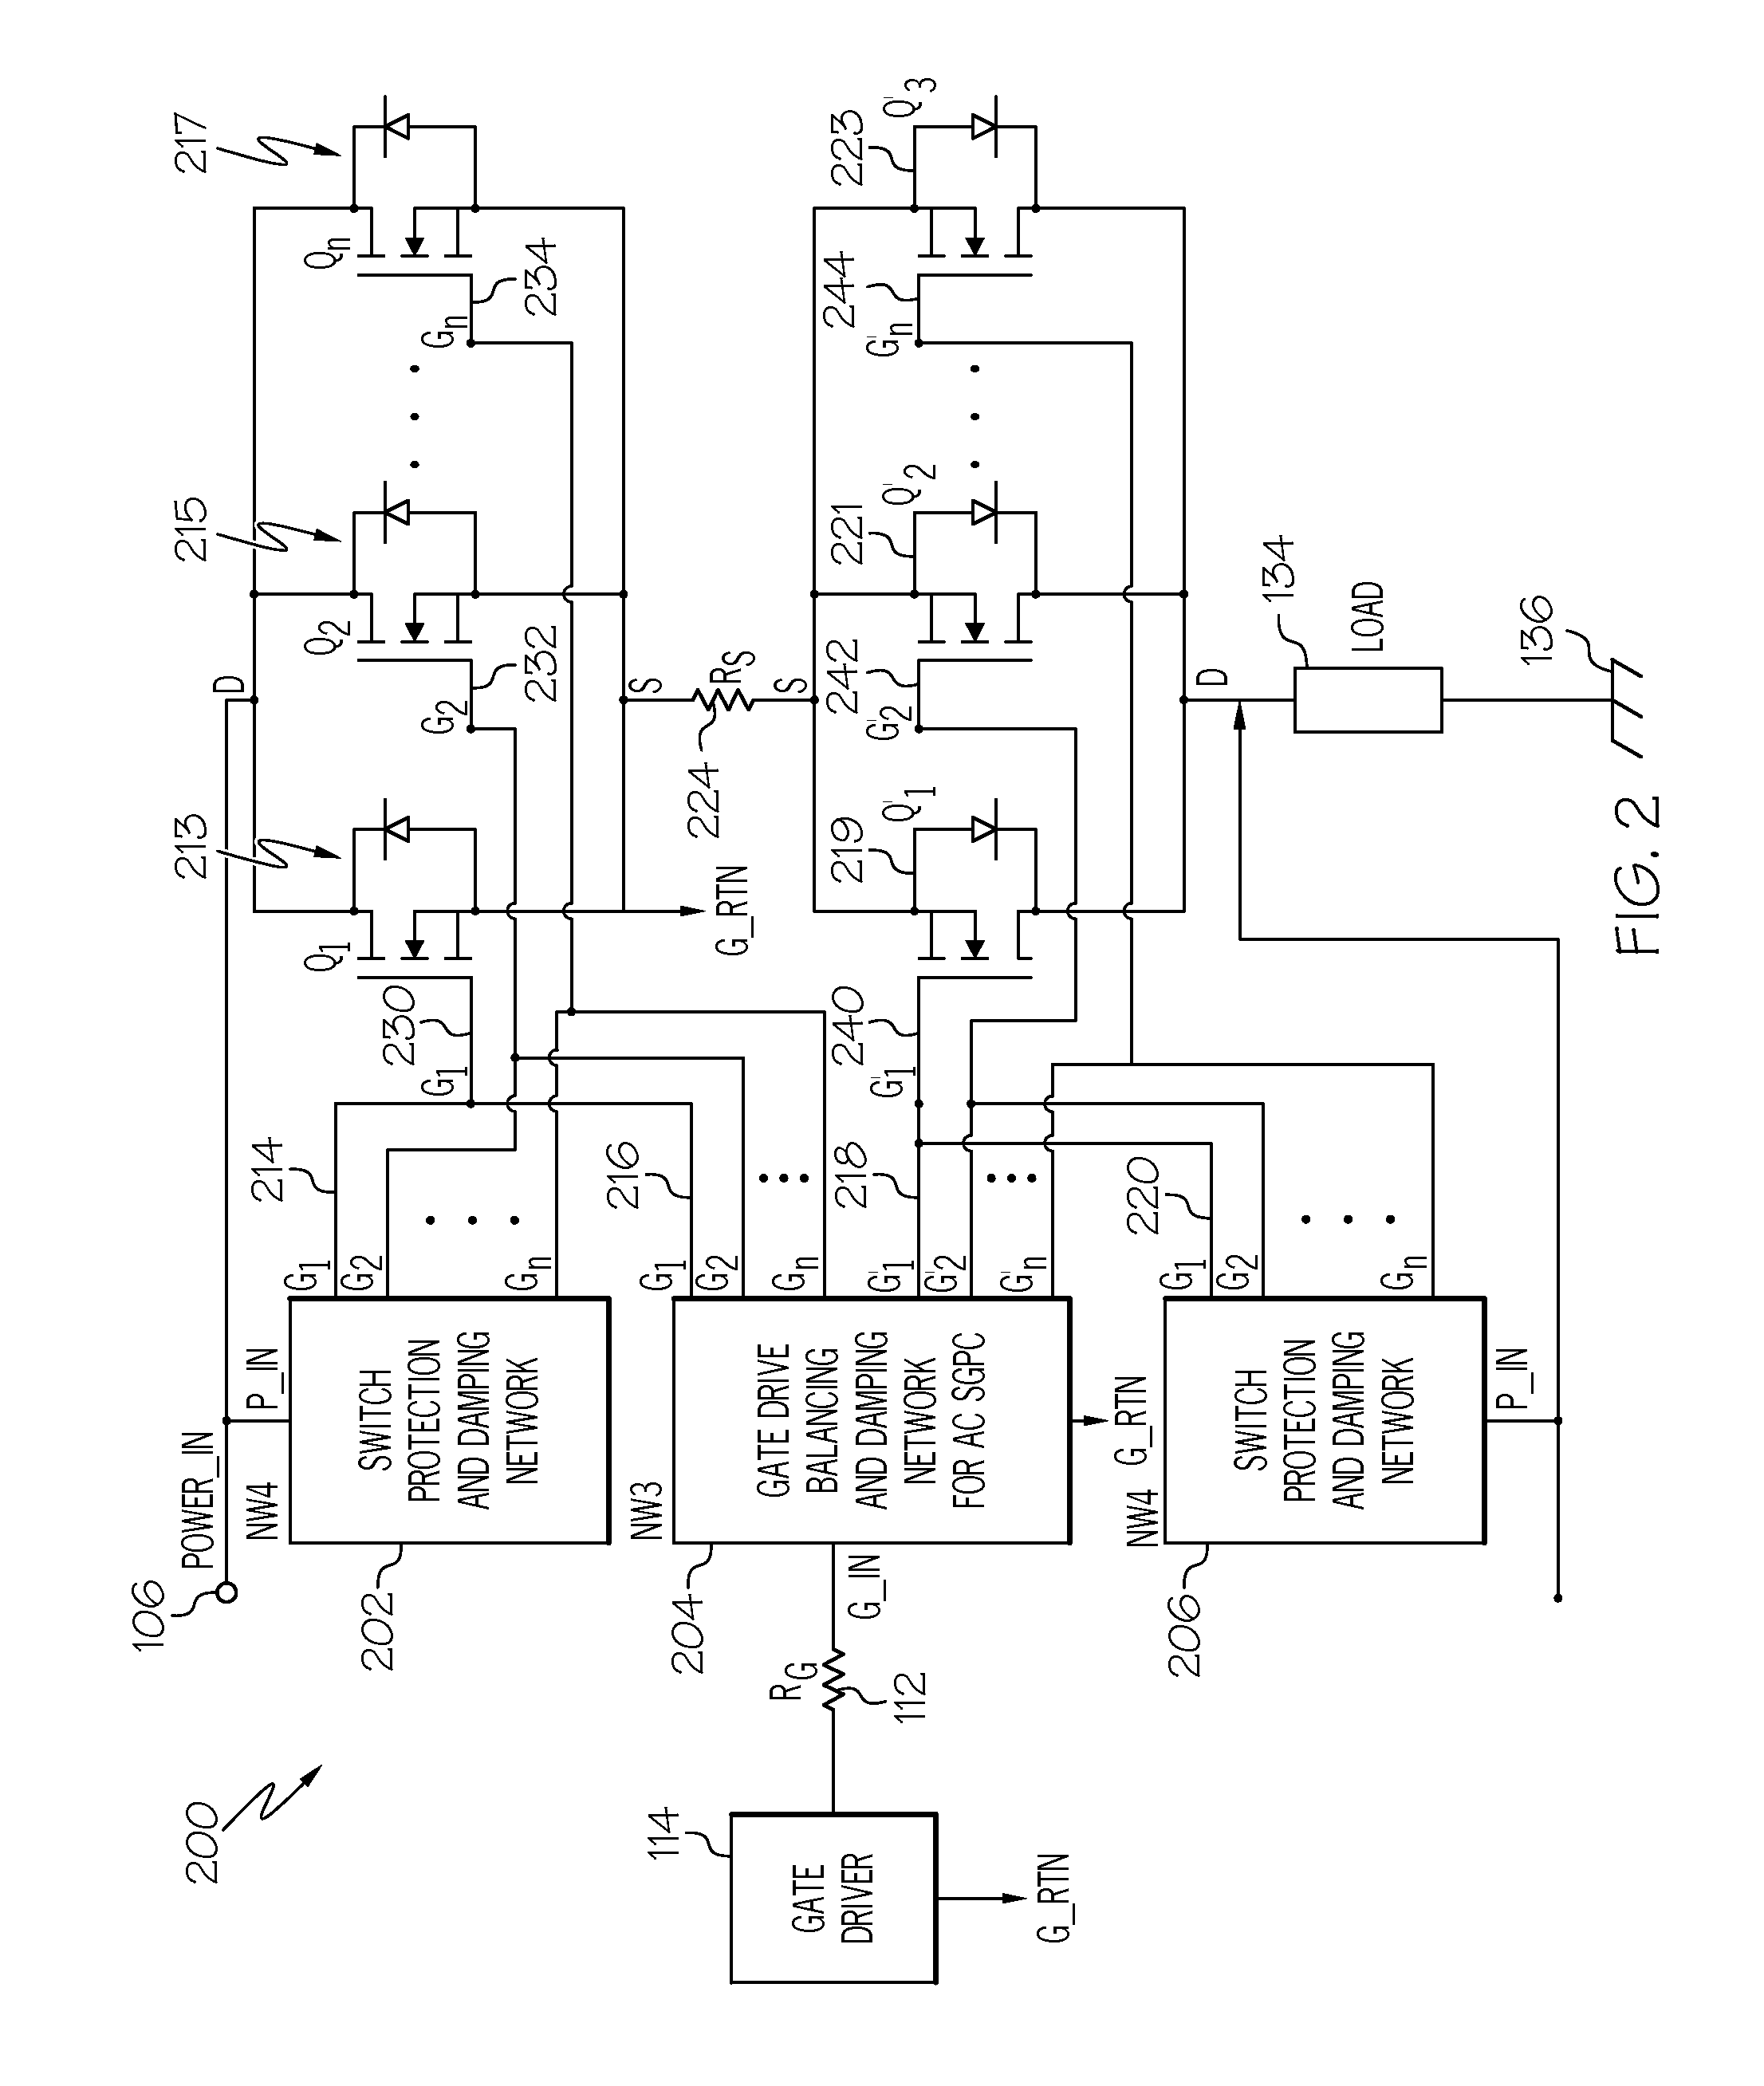 Approach for driving multiple MOSFETs in parallel for high power solid state power controller applications